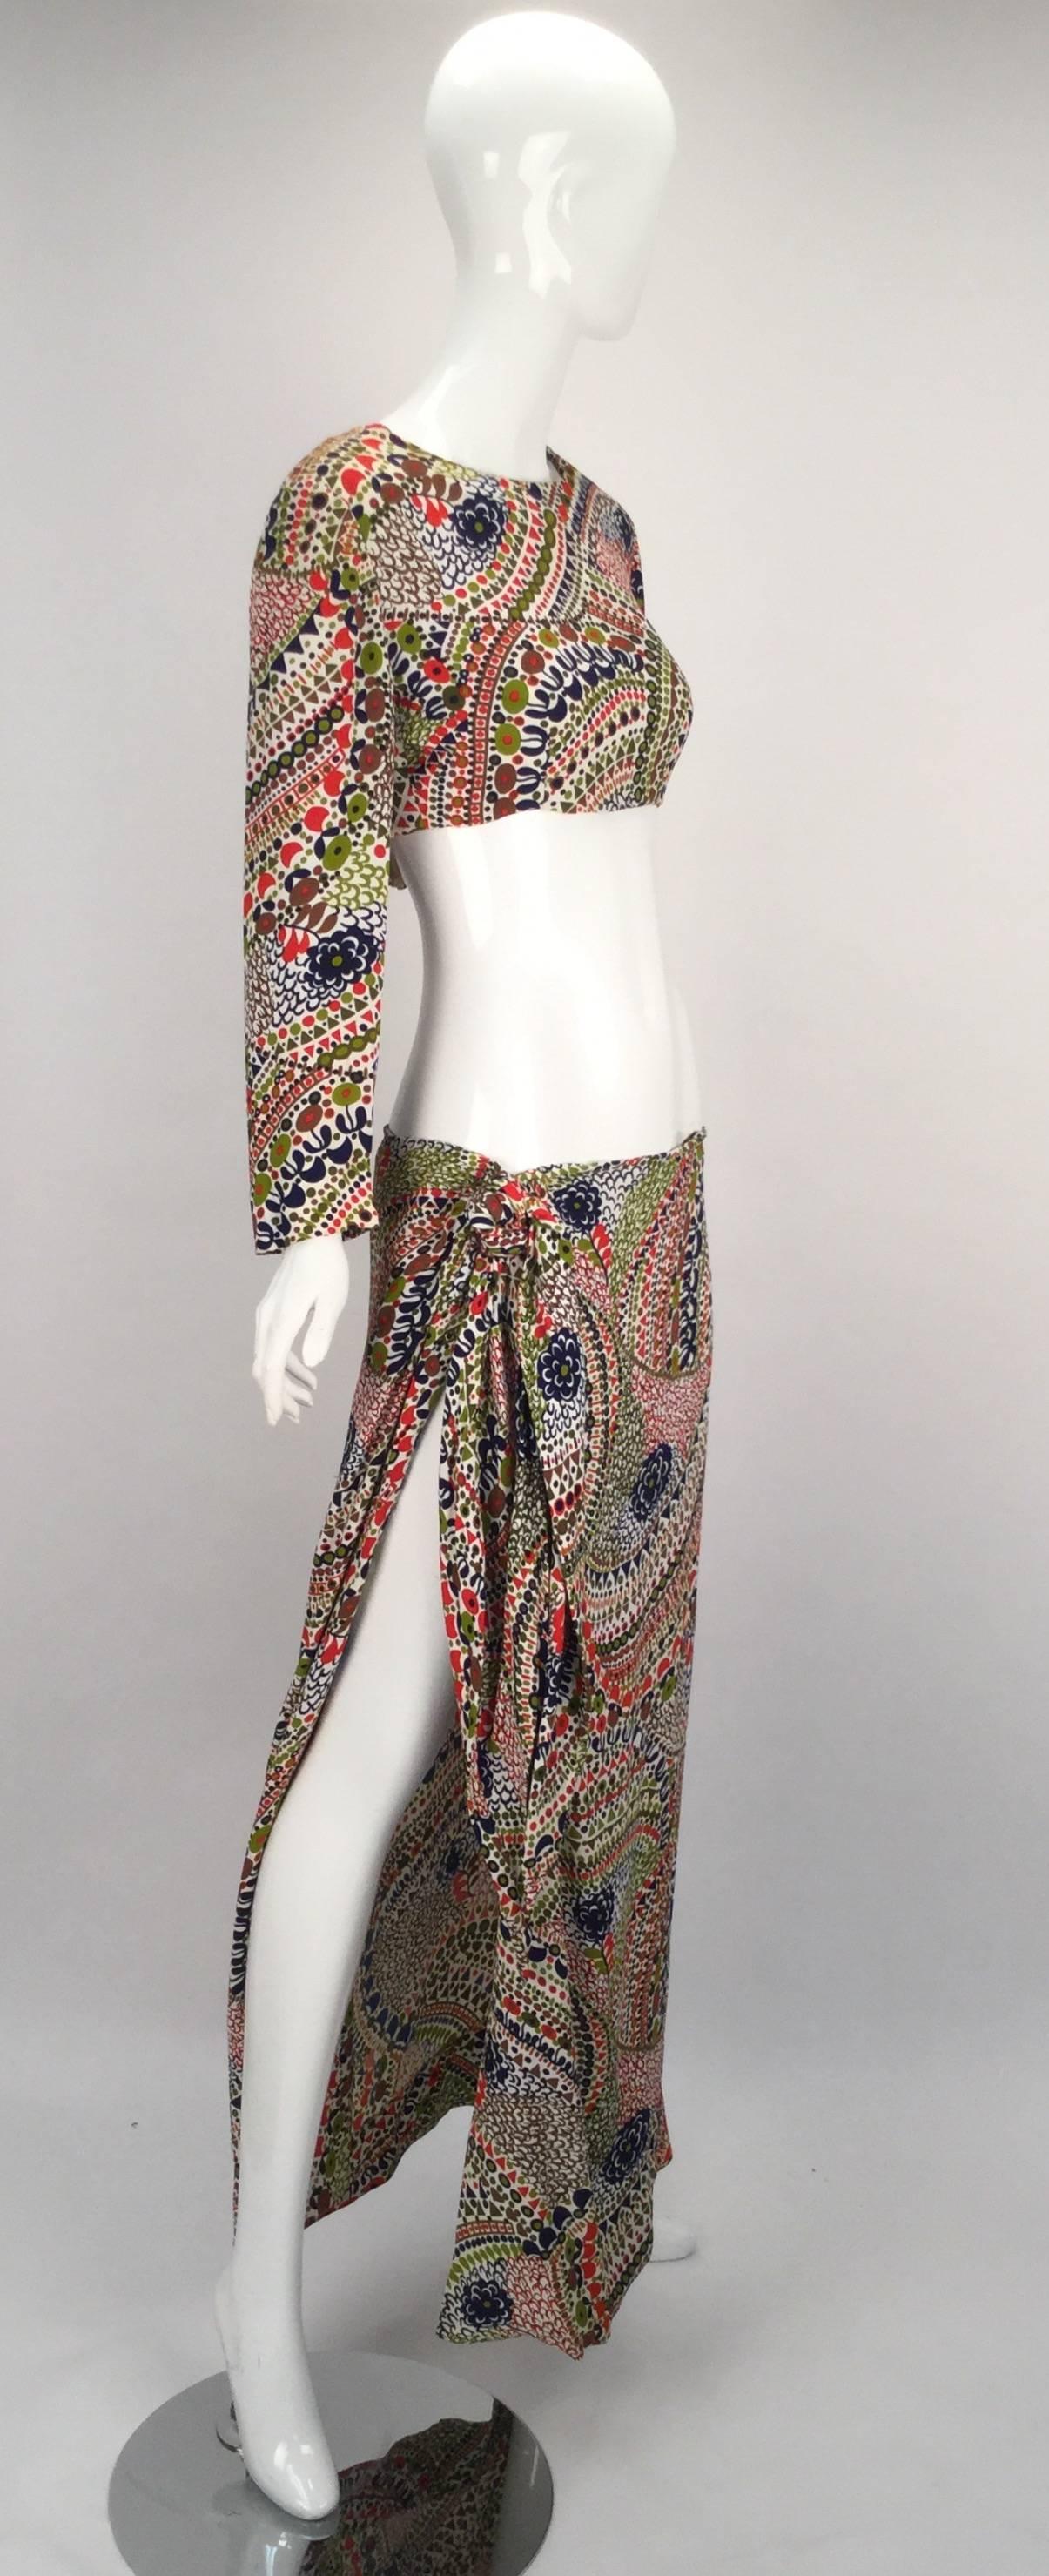 Signed and numbered 017113351, this Christian Dior Boutique three piece beach set from the 1960's is one of a kind!!!  Wonderful ethnic, meets mod, meets bohemian print used throughout this magnificent piece of work. 

A crop beach top featuring a